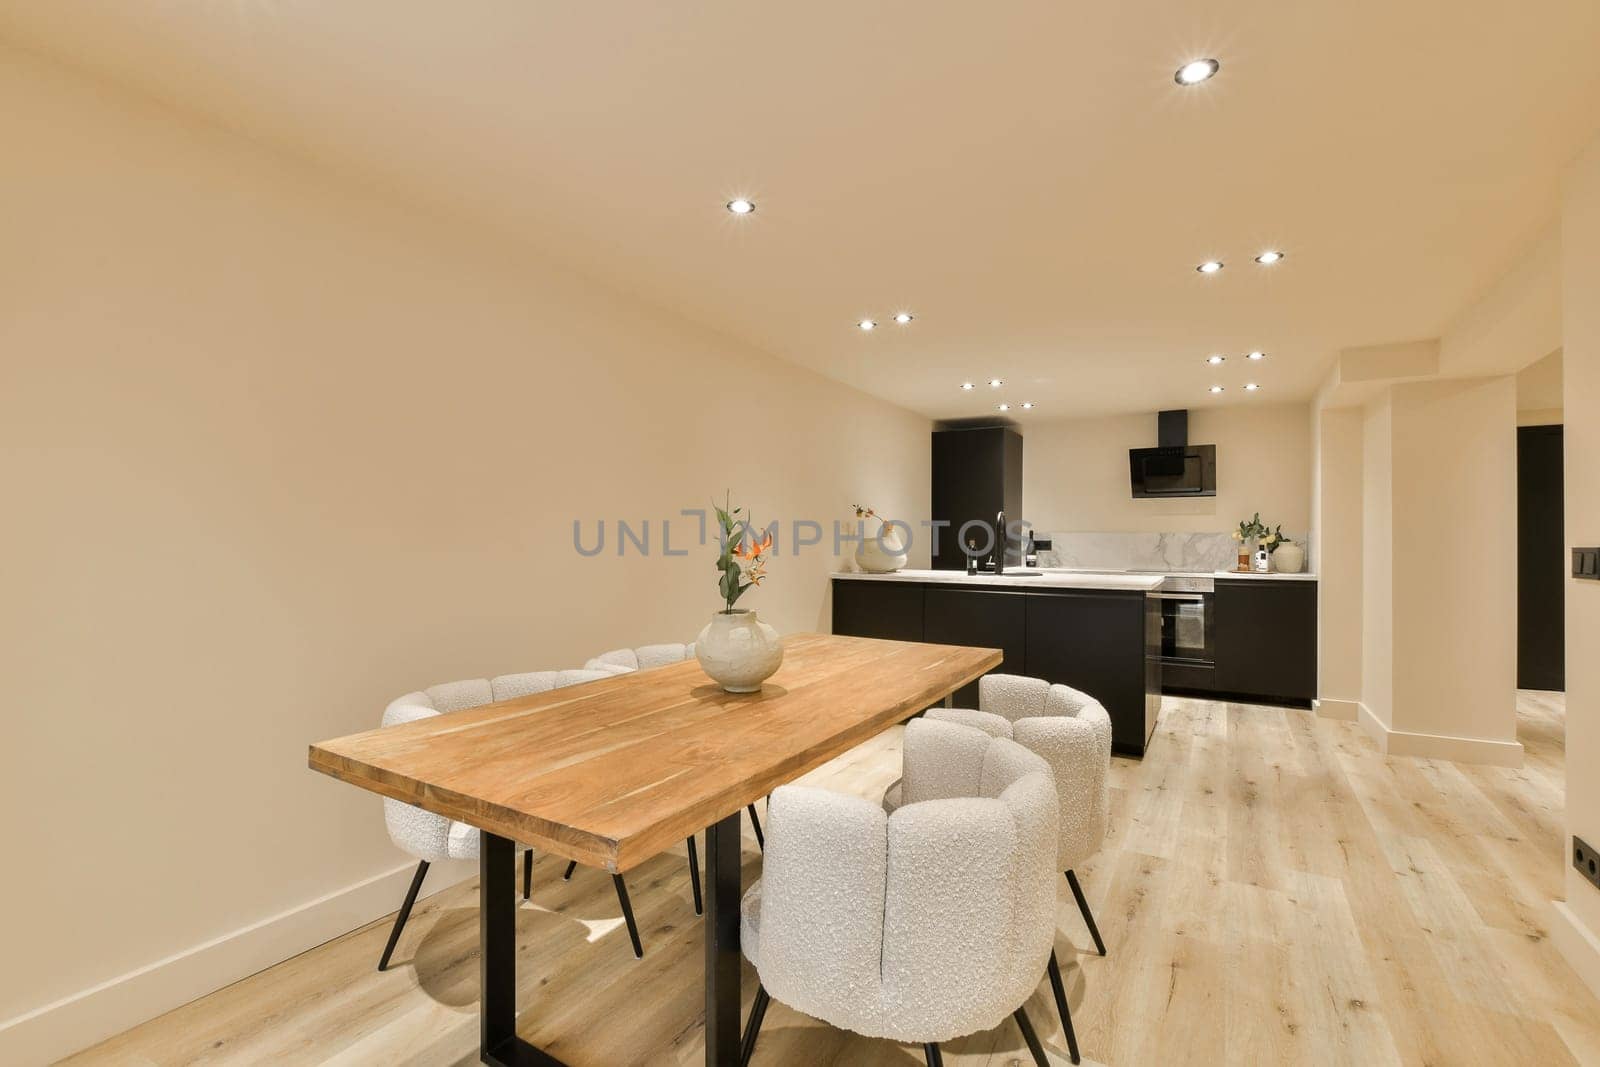 a kitchen and dining area in a house with white walls, hardwood flooring and light wood table surrounded by chairs